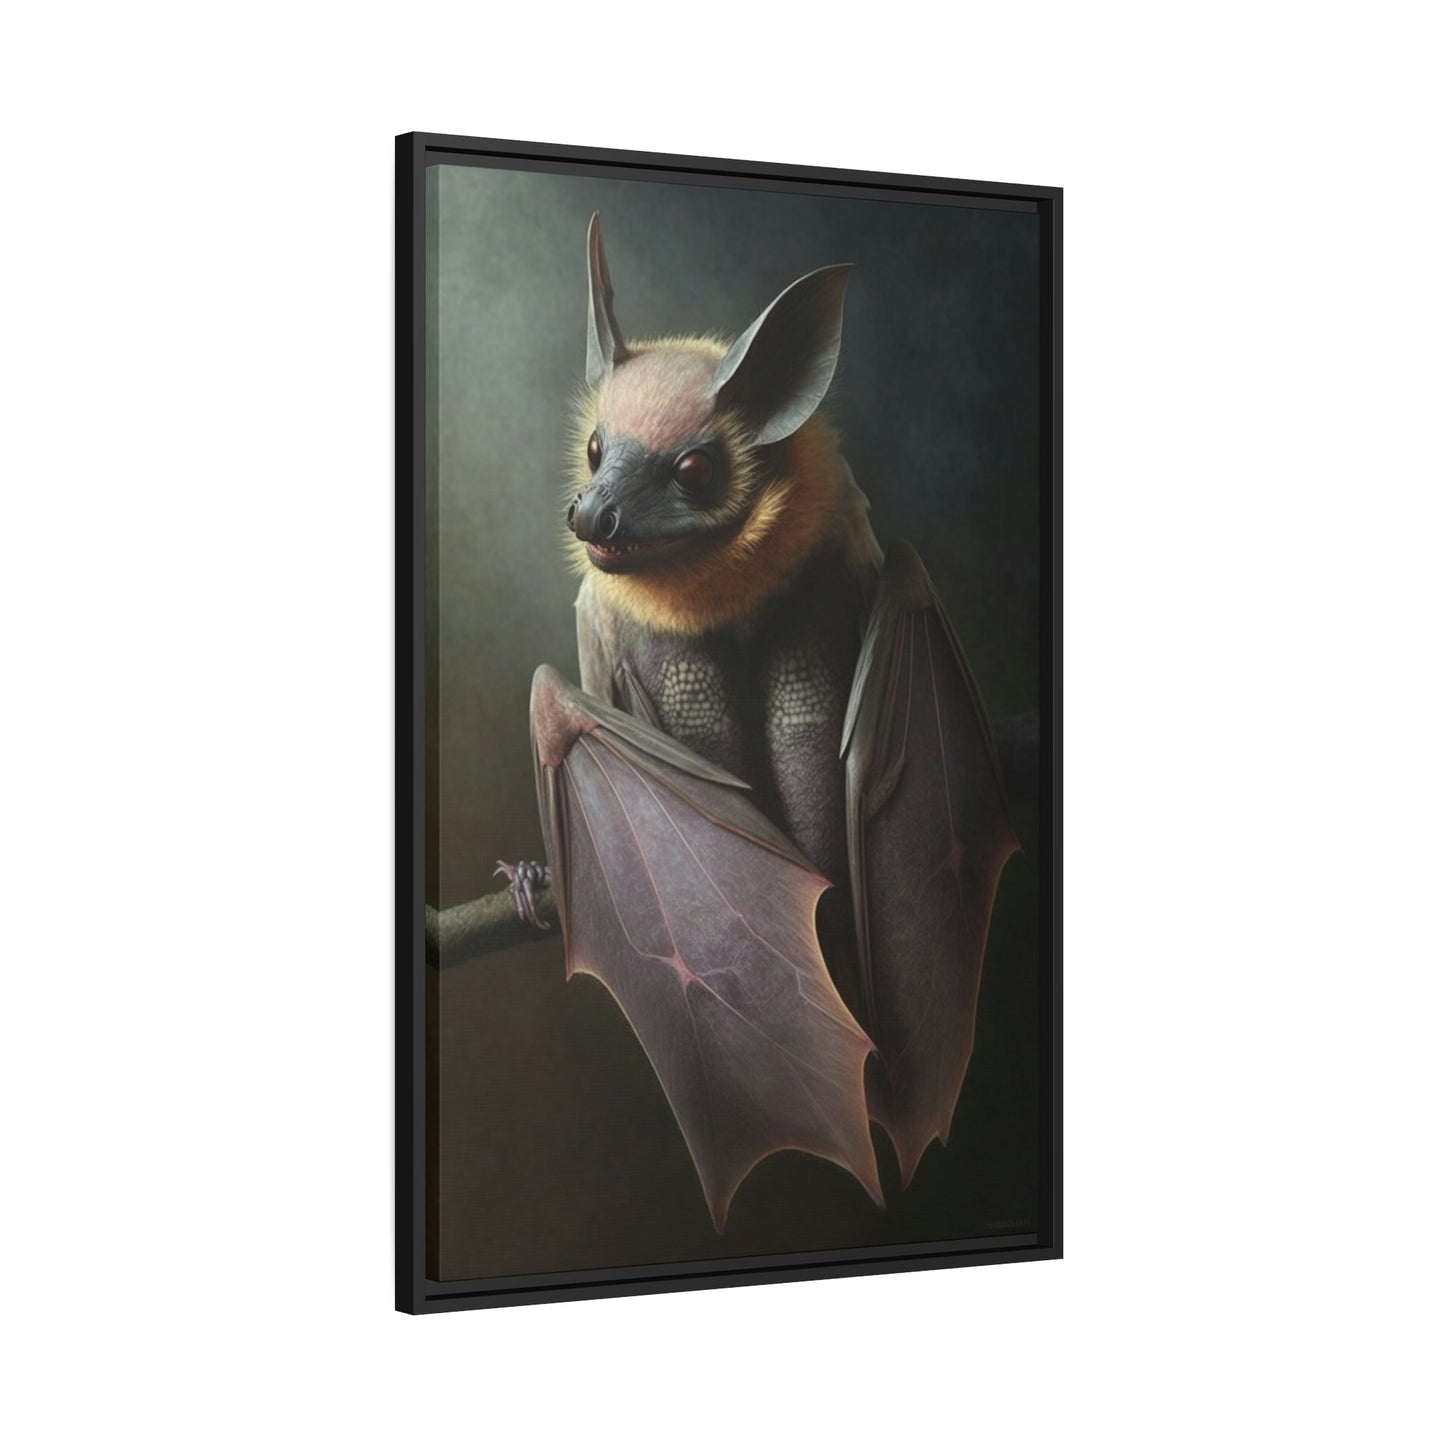 In the Shadows: Poster & Canvas Art Print of a Single Bat in the Dark